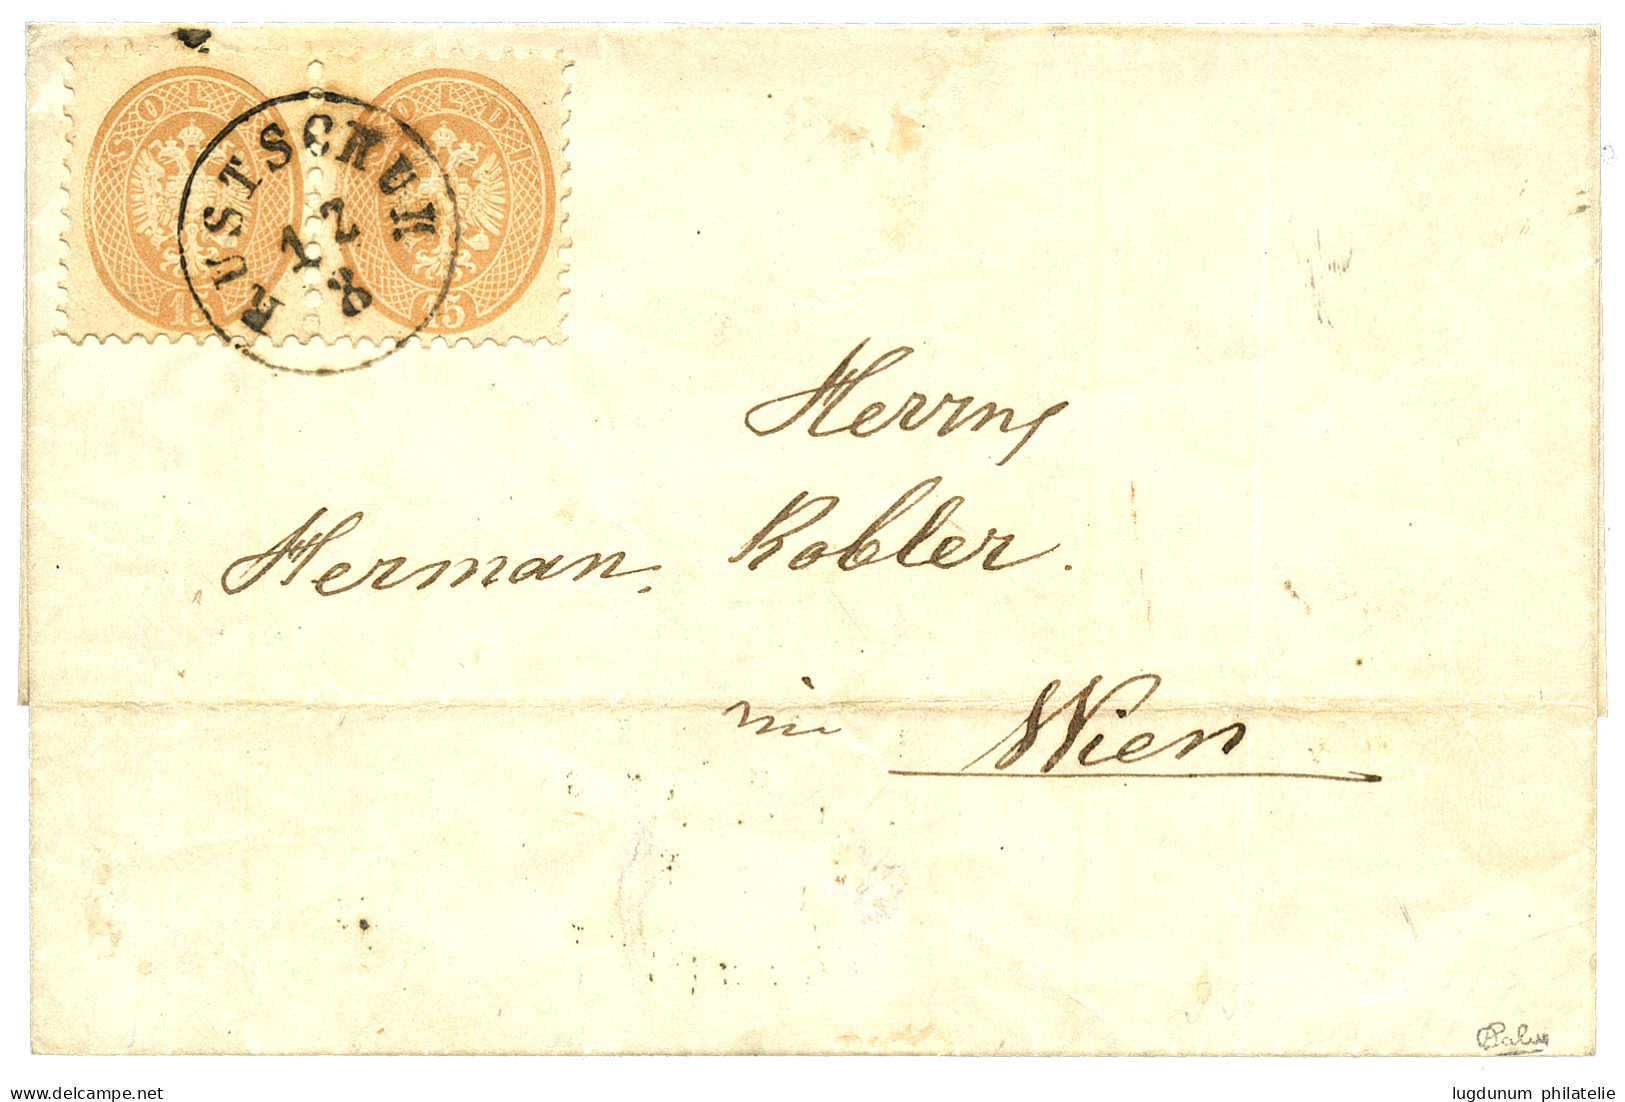 RUSTSCHUK : 1865 Pair 15 Soldi Canc. RUSTSHUK On Cover To WIEN. Signed CALVES. Superb. - Levante-Marken